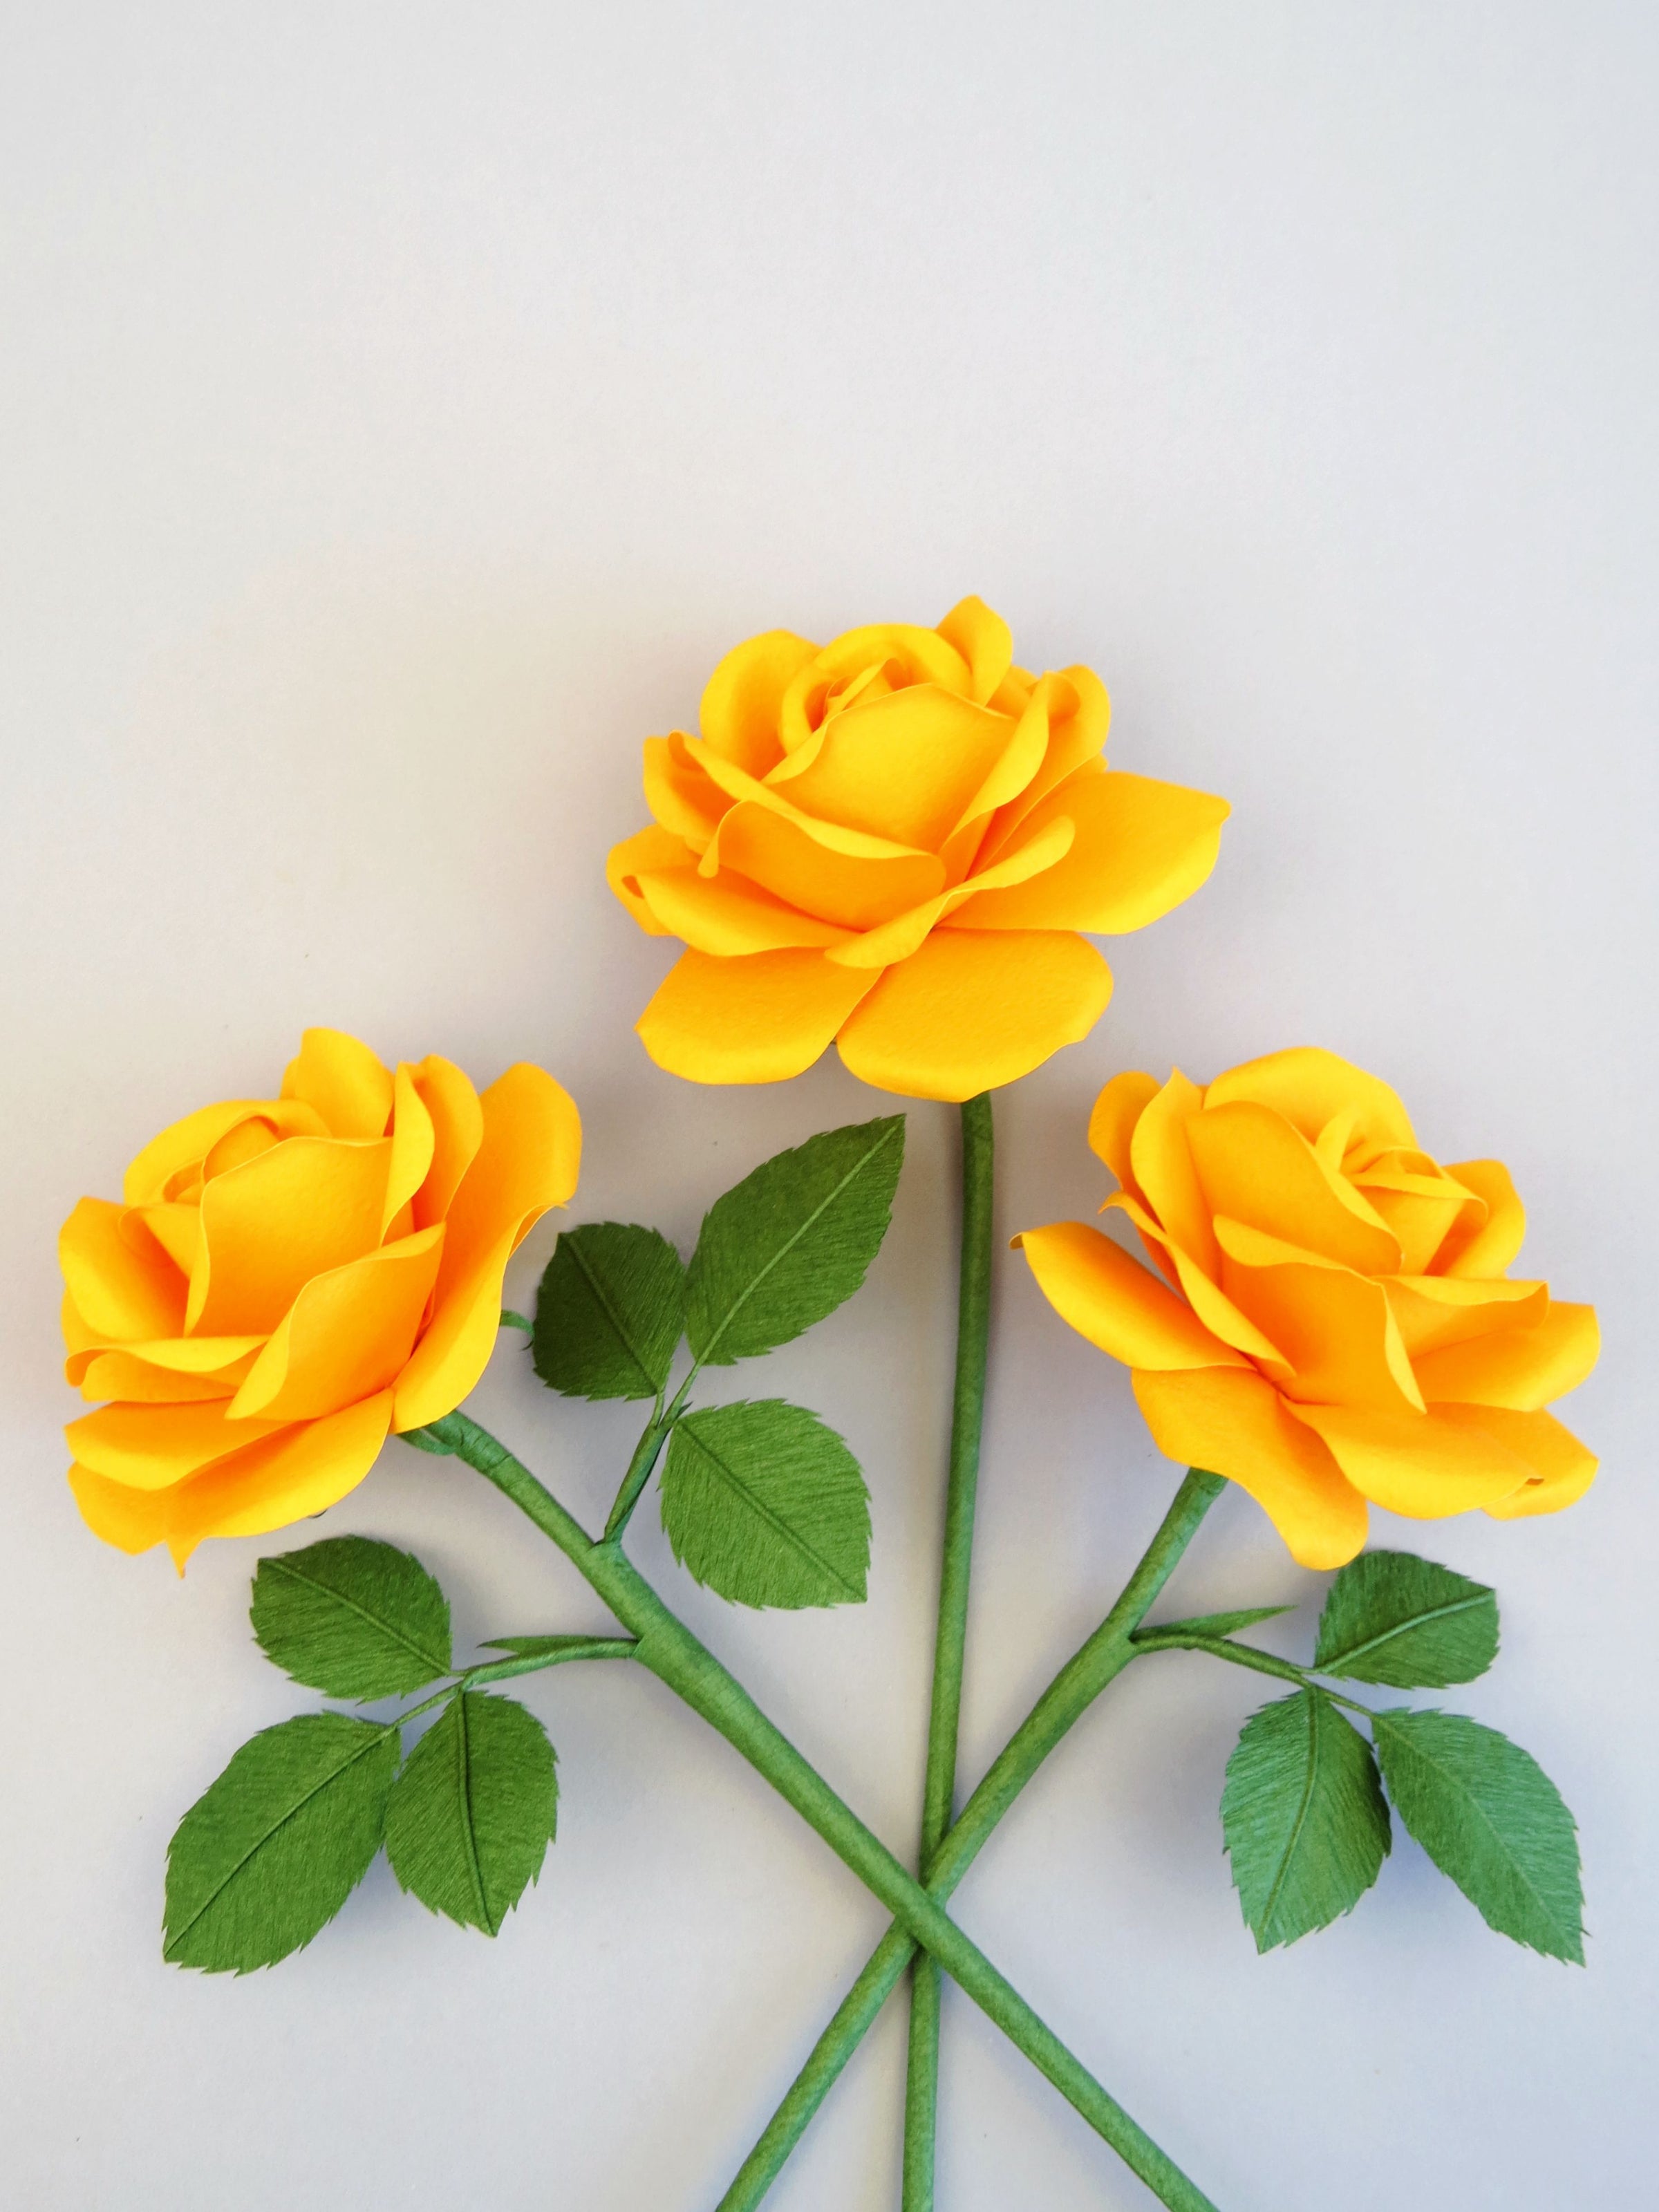 Three yellow cotton paper roses randomly lying next to each other on a grey background. The left rose has six green leaves attached, the middle rose has no leaves and the right rose has three green leaves